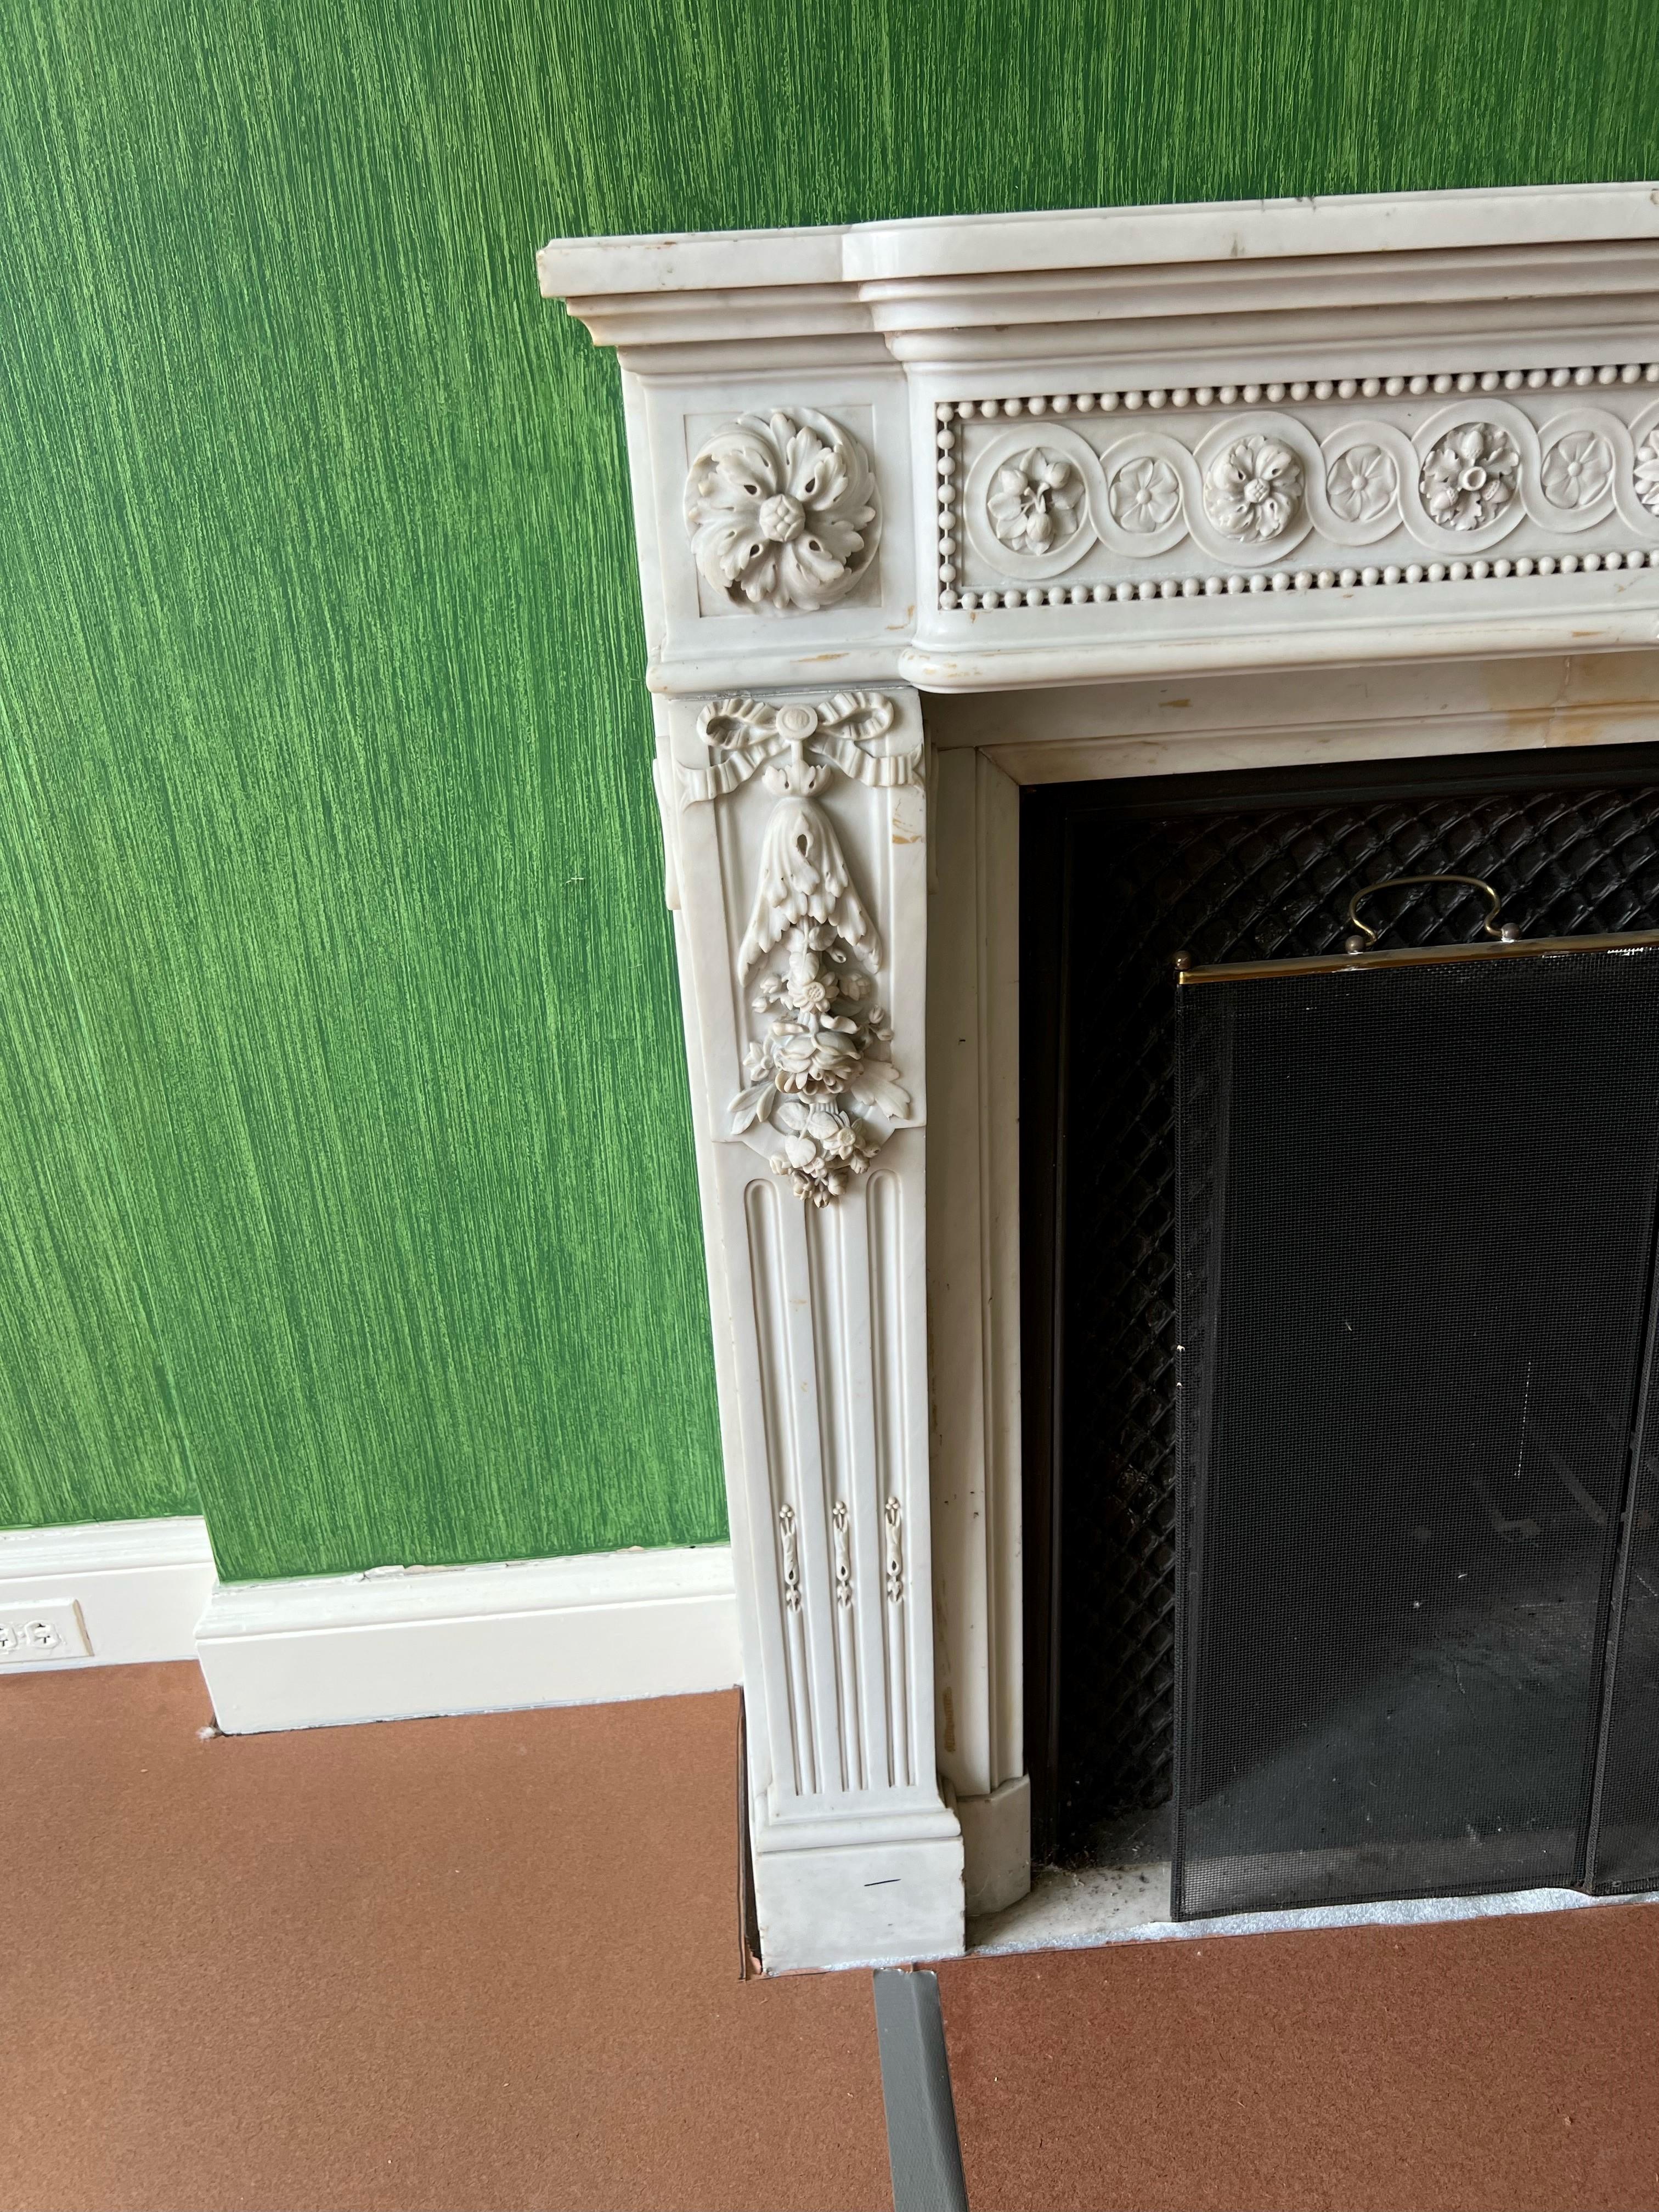 Late 19th c. Louis XVI style mantel in carrara marble with stepped frieze elaborated with guilloche carving detail, stop fluted tablet and rose swag. Fluted console jambs exhibit ribbon and rose carving details and support corner blocks with